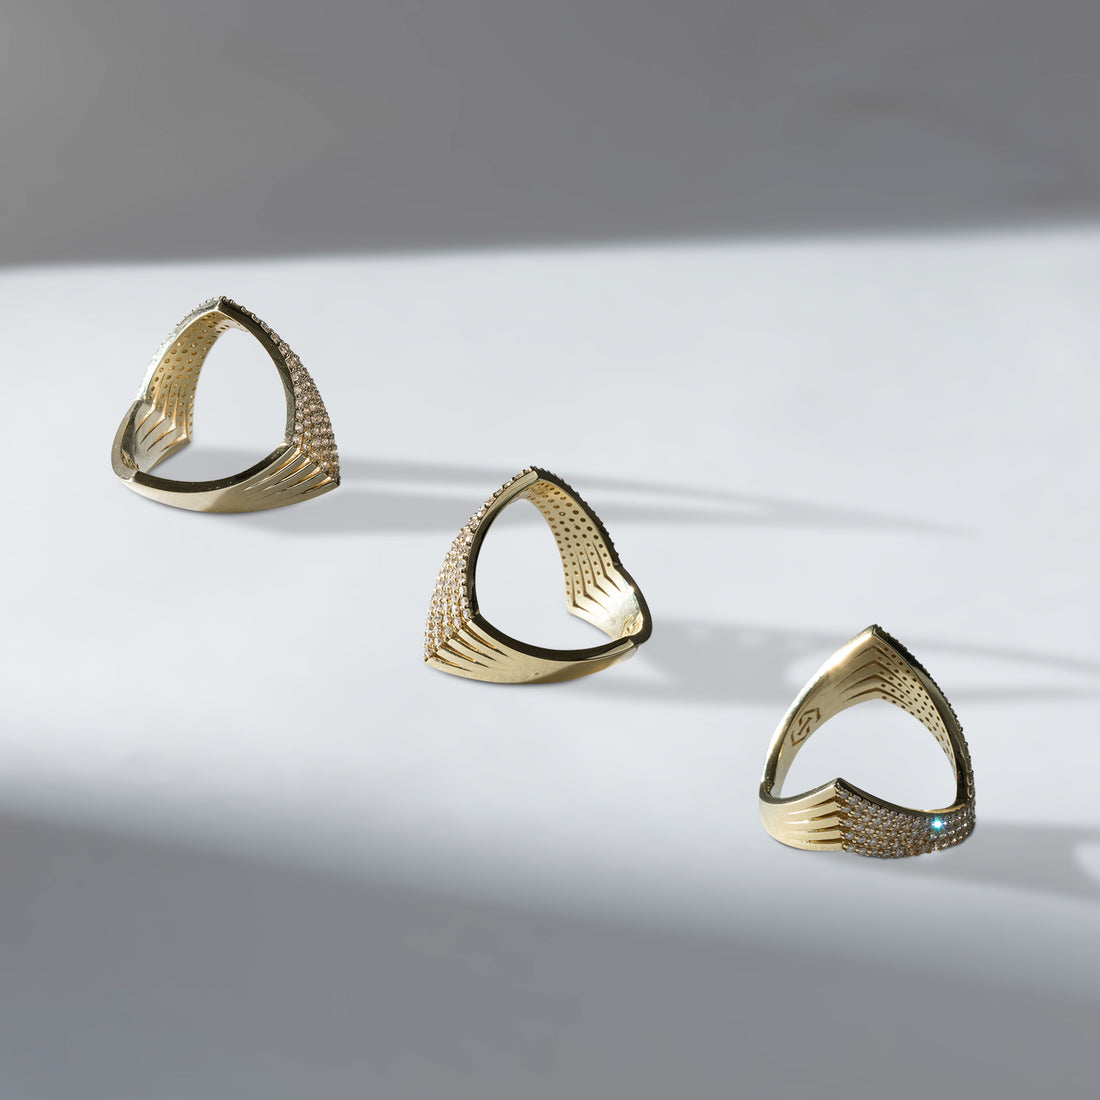 Three ILA SODHANI Never Have I Ever Rings in yellow gold with natural diamonds facing different directions to show sides of the interior; shown on white background.